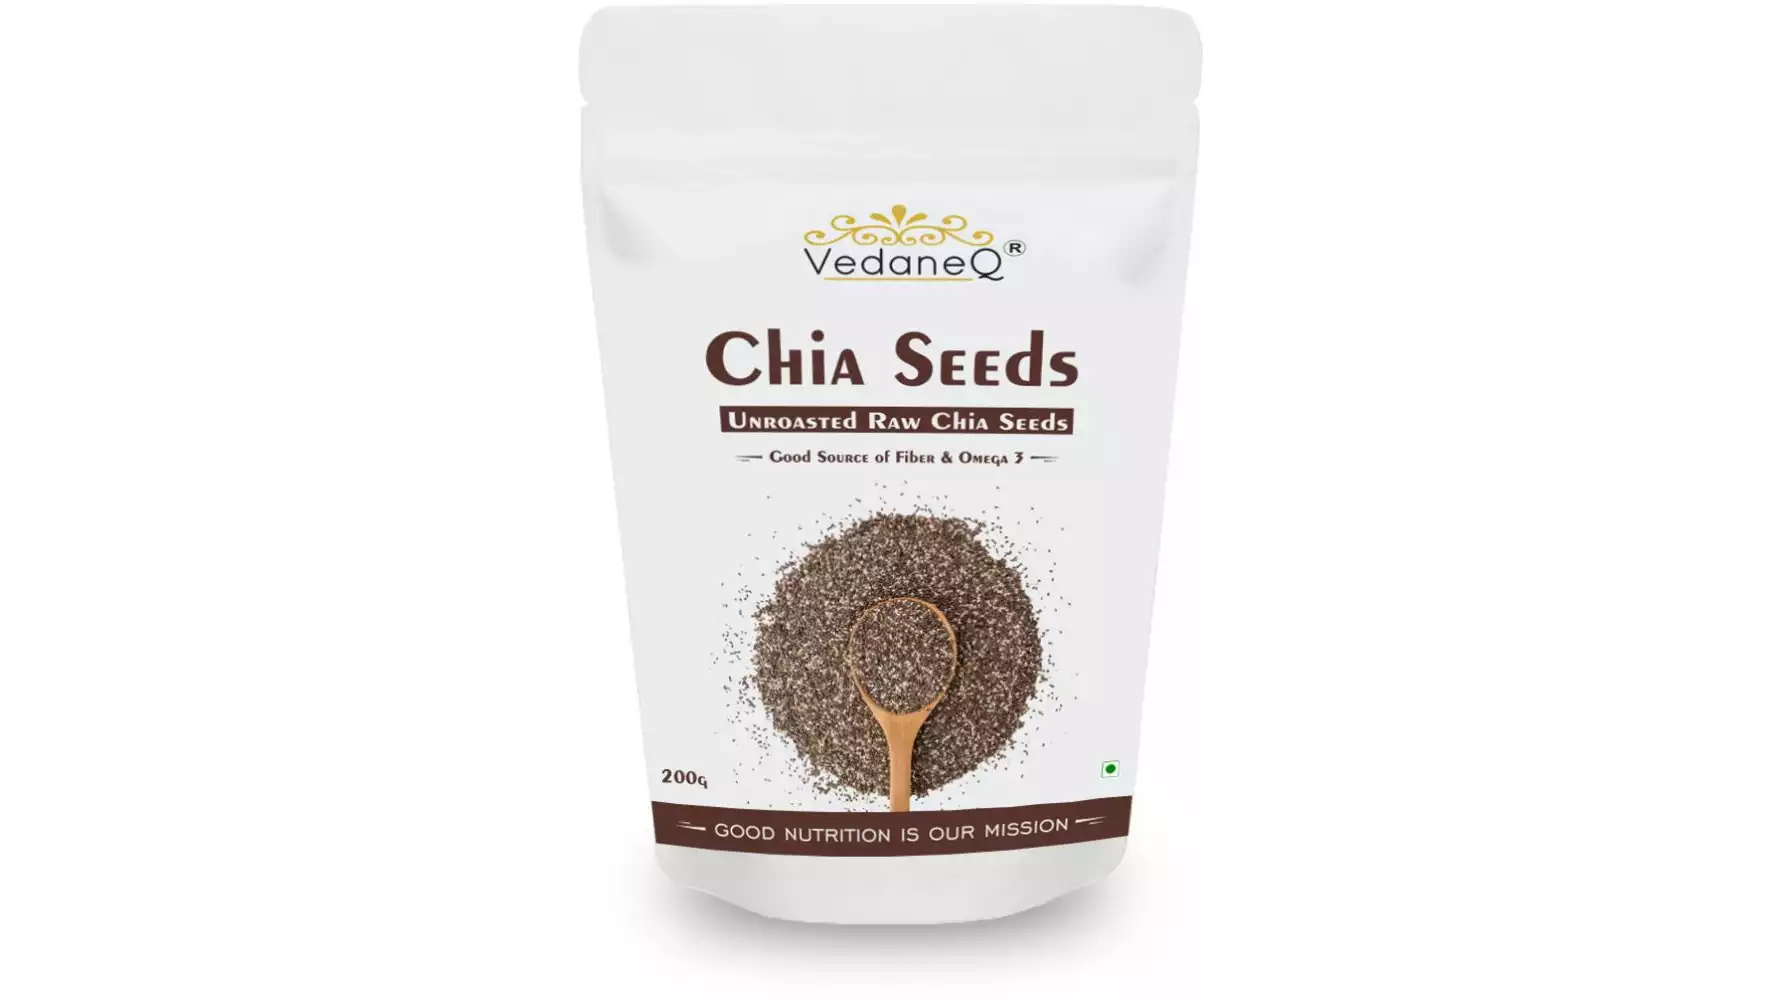 VedaneQ Unroasted Chia Seeds (200g)